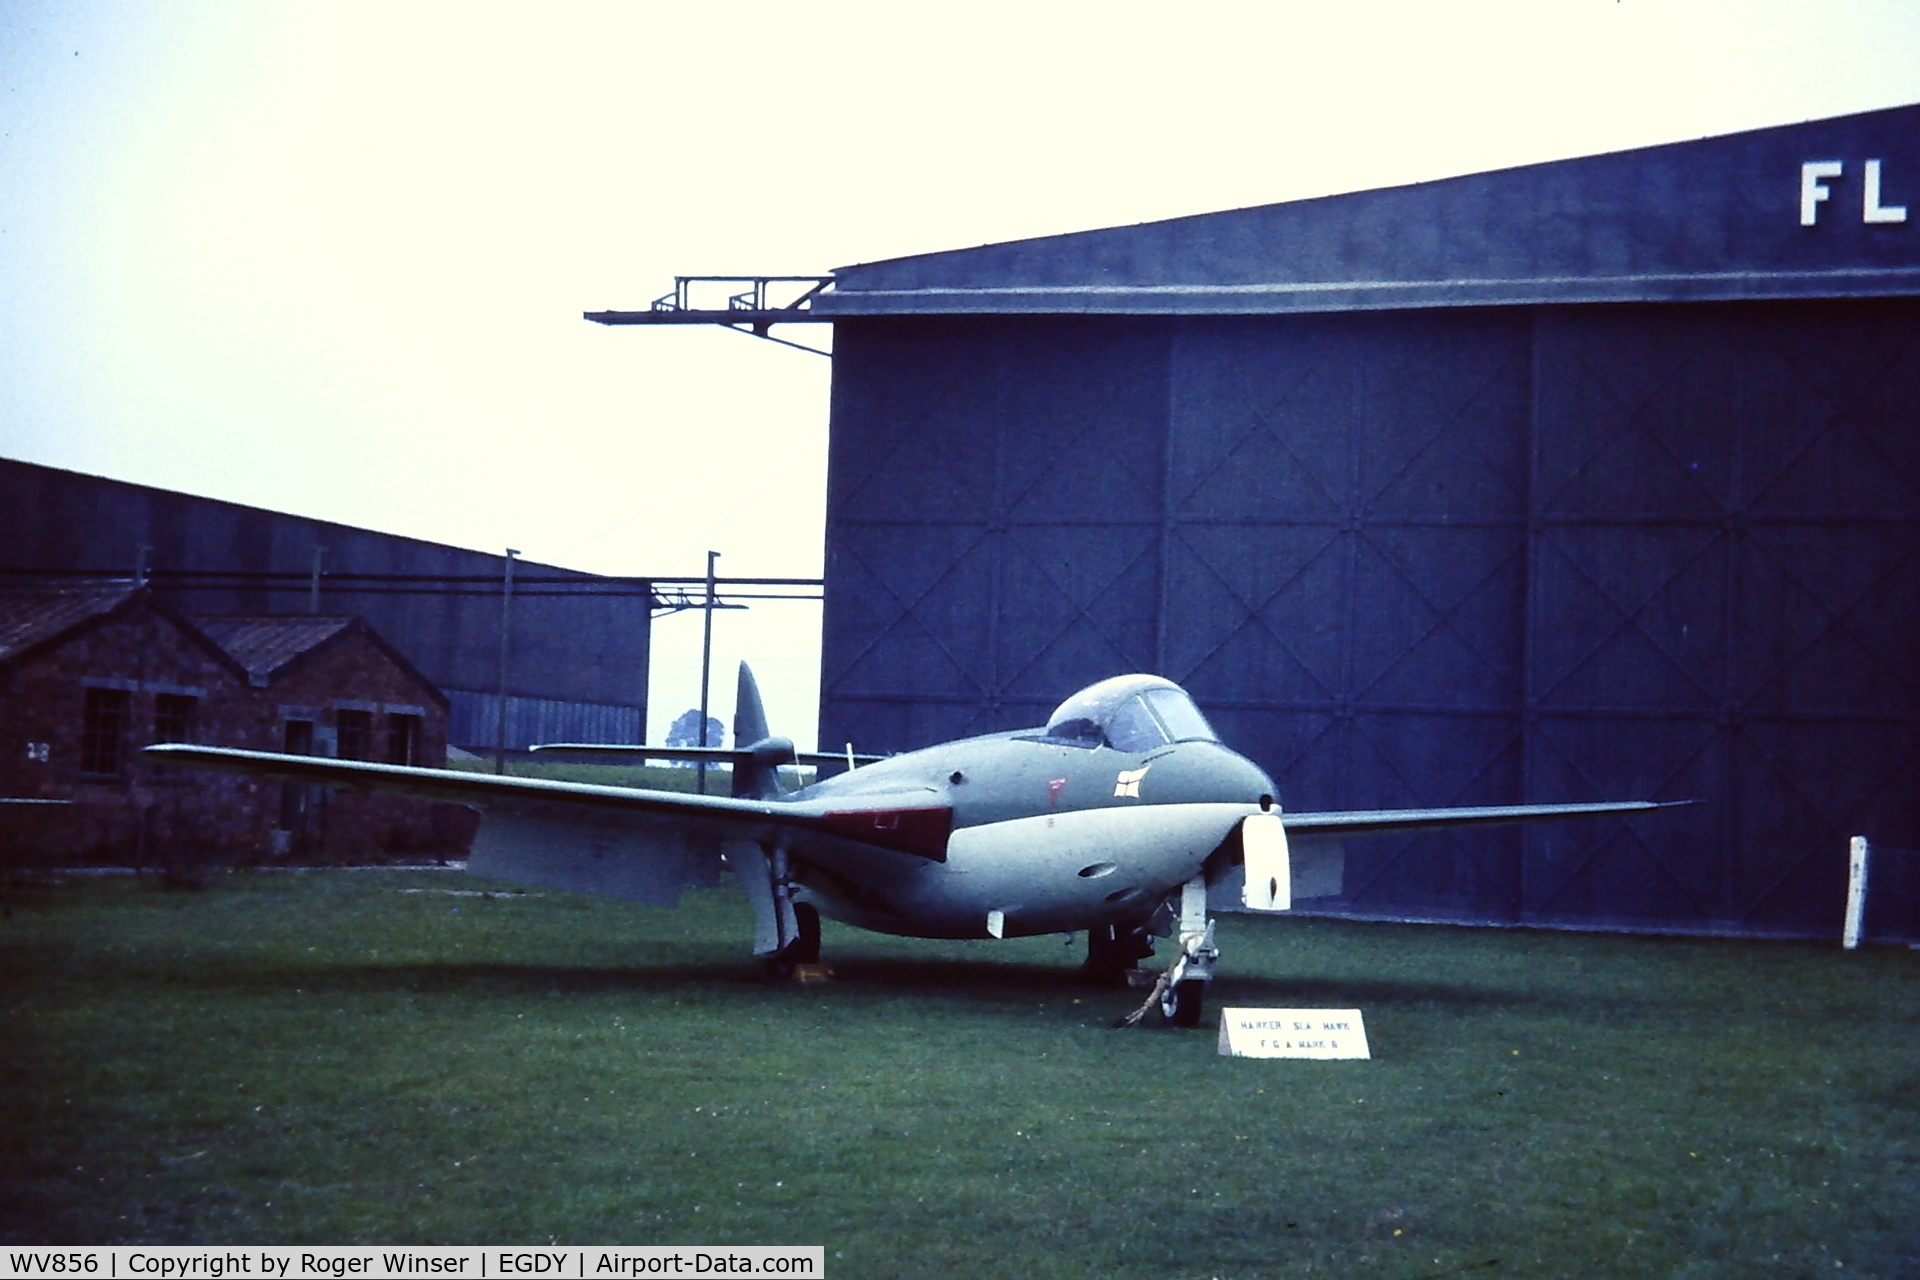 WV856, 1954 Hawker Sea Hawk FGA.6 C/N 6101, Parked outside a hangar of the Fleet Air Arm museum at RNAS Yeovilton in late 1960's/early 1970's. Painted in the green/white Admirals Barge colour scheme when the aircraft was operated by 781 NAS.